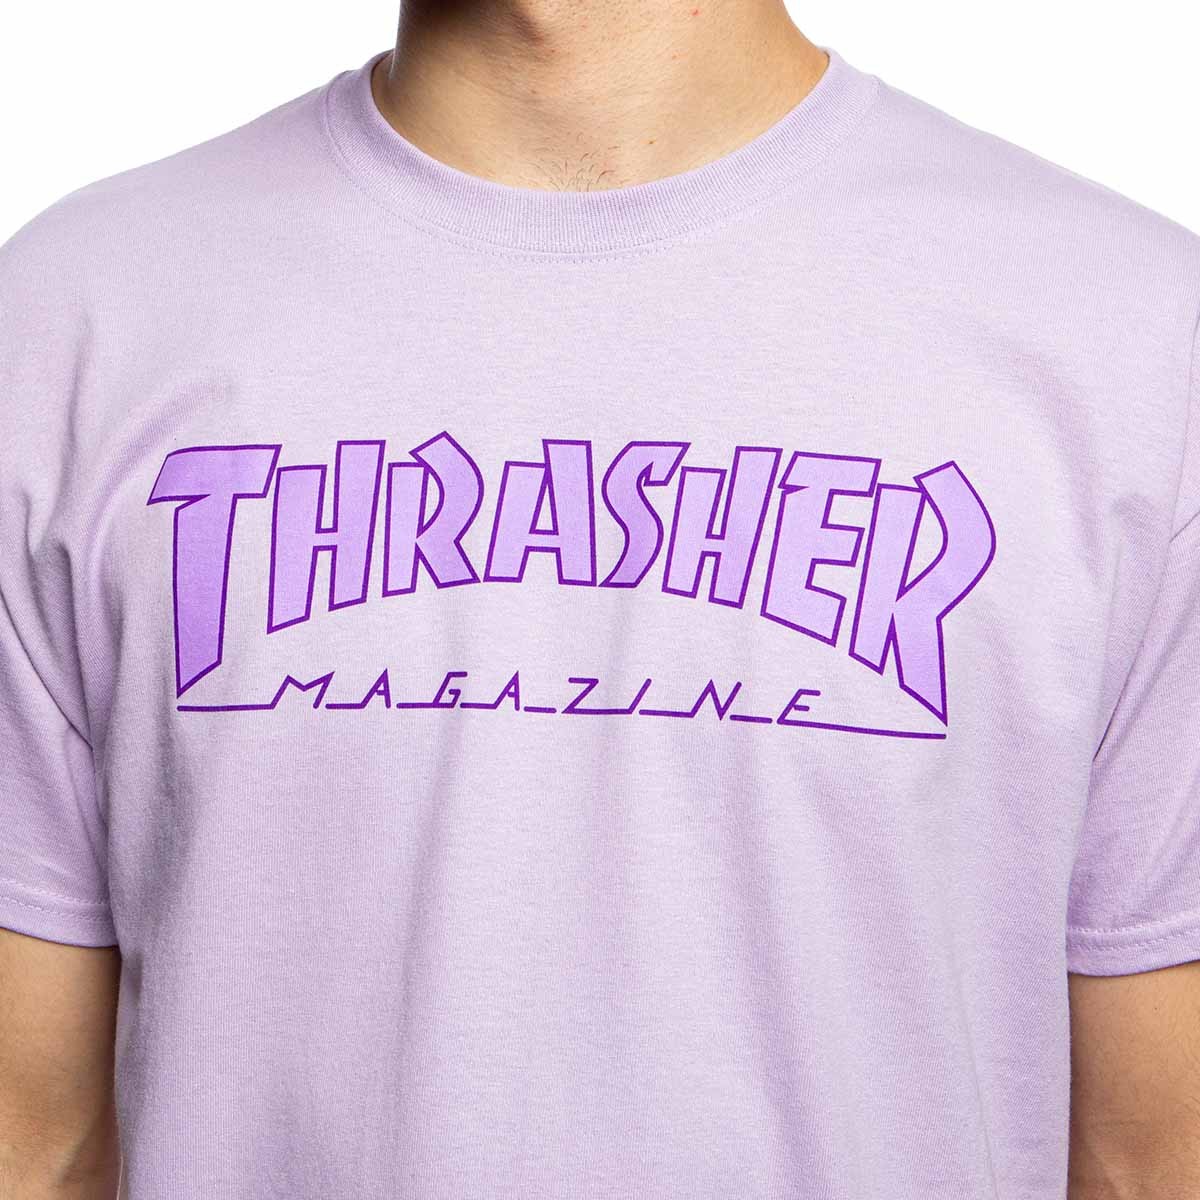 Thrasher Outlined Orchid T-Shirt 144877